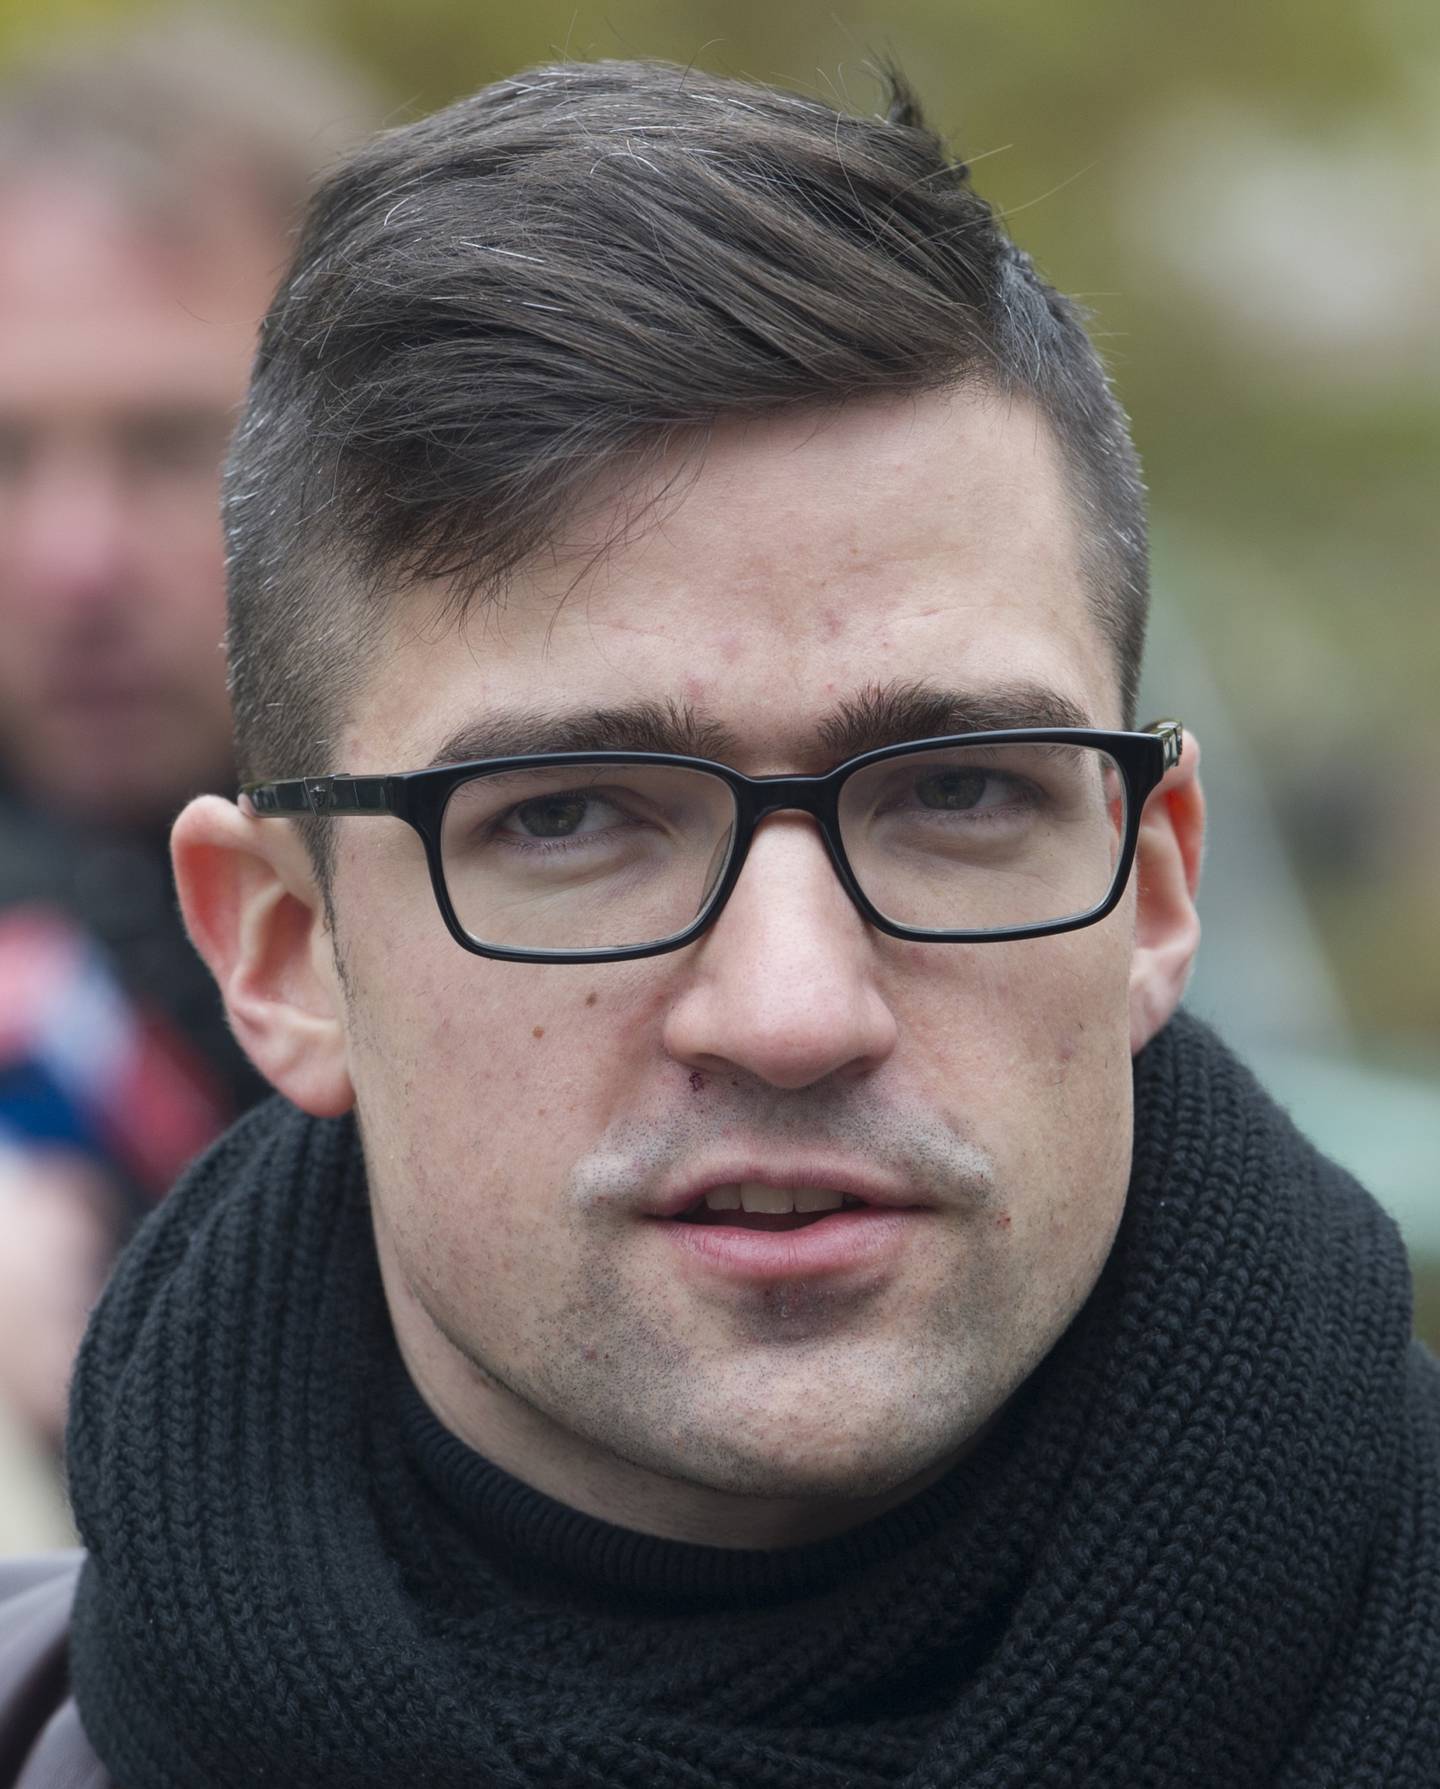 File--- In this picture taken Nov.5, 2016 Martin Sellner, leader of the right-wing populist Identitarian movement of Austria is seen giving an interview in Berlin, Germany. (Paul Zinken/dpa via AP)